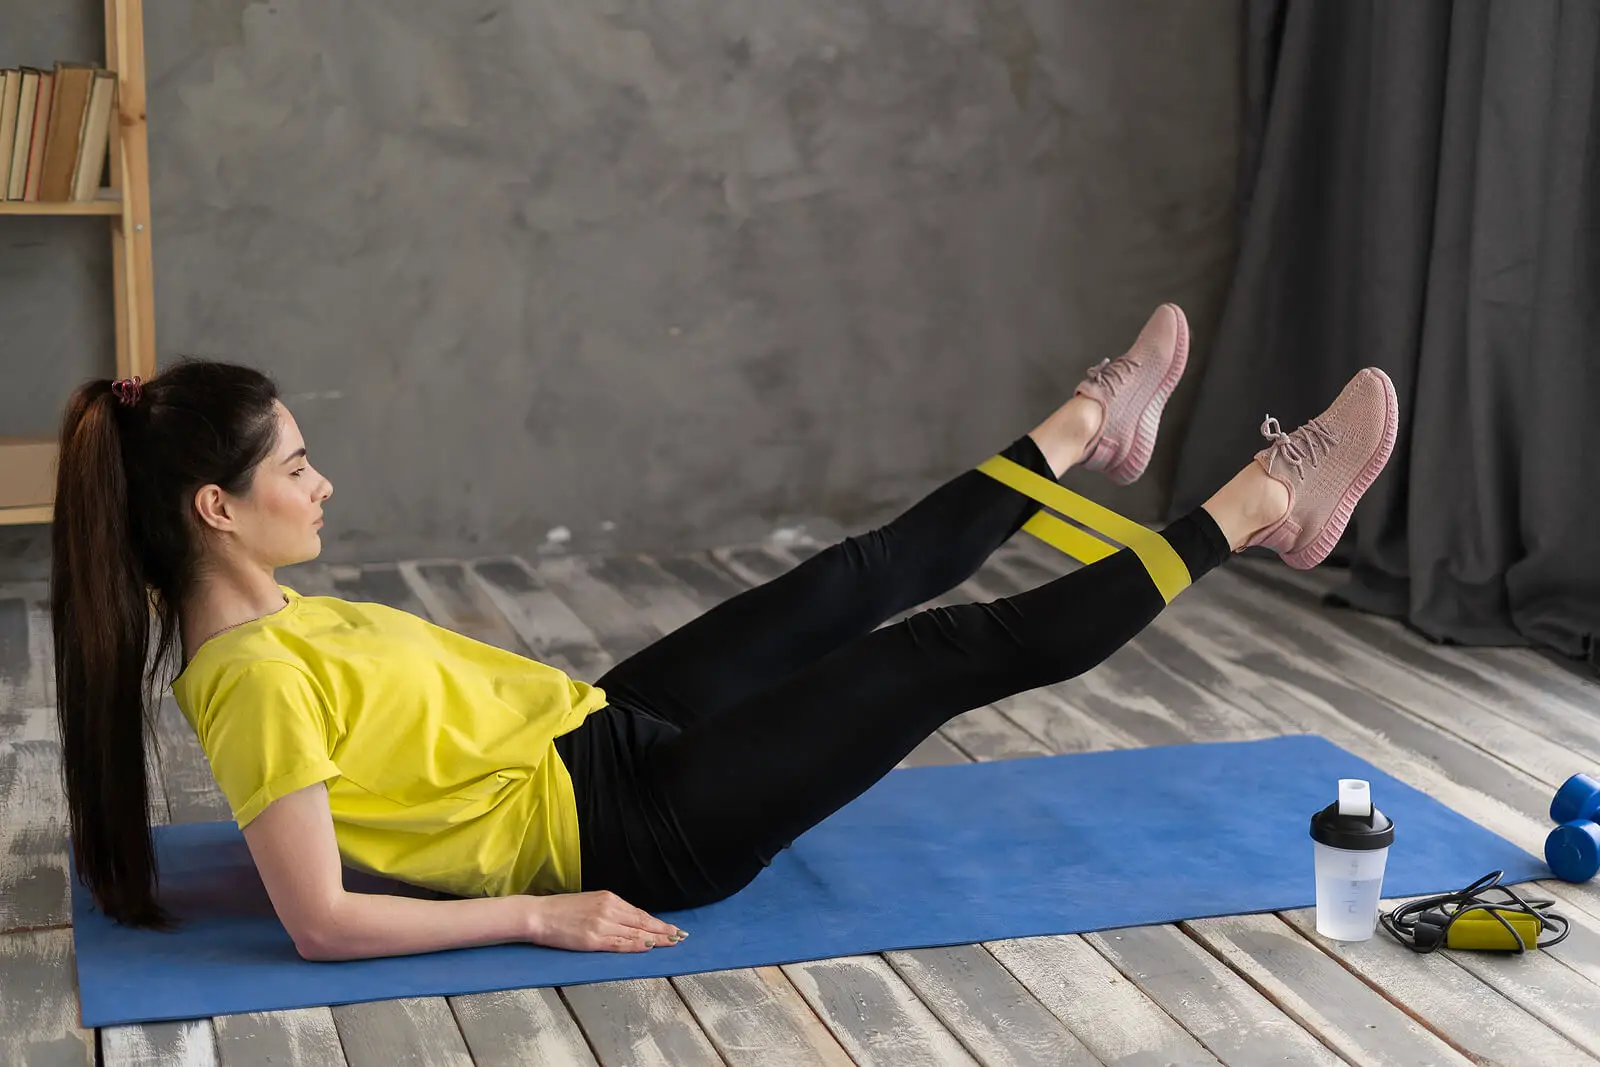 How to Do Lying Leg Raises with a Resistance Band: A Step-by-Step Guide